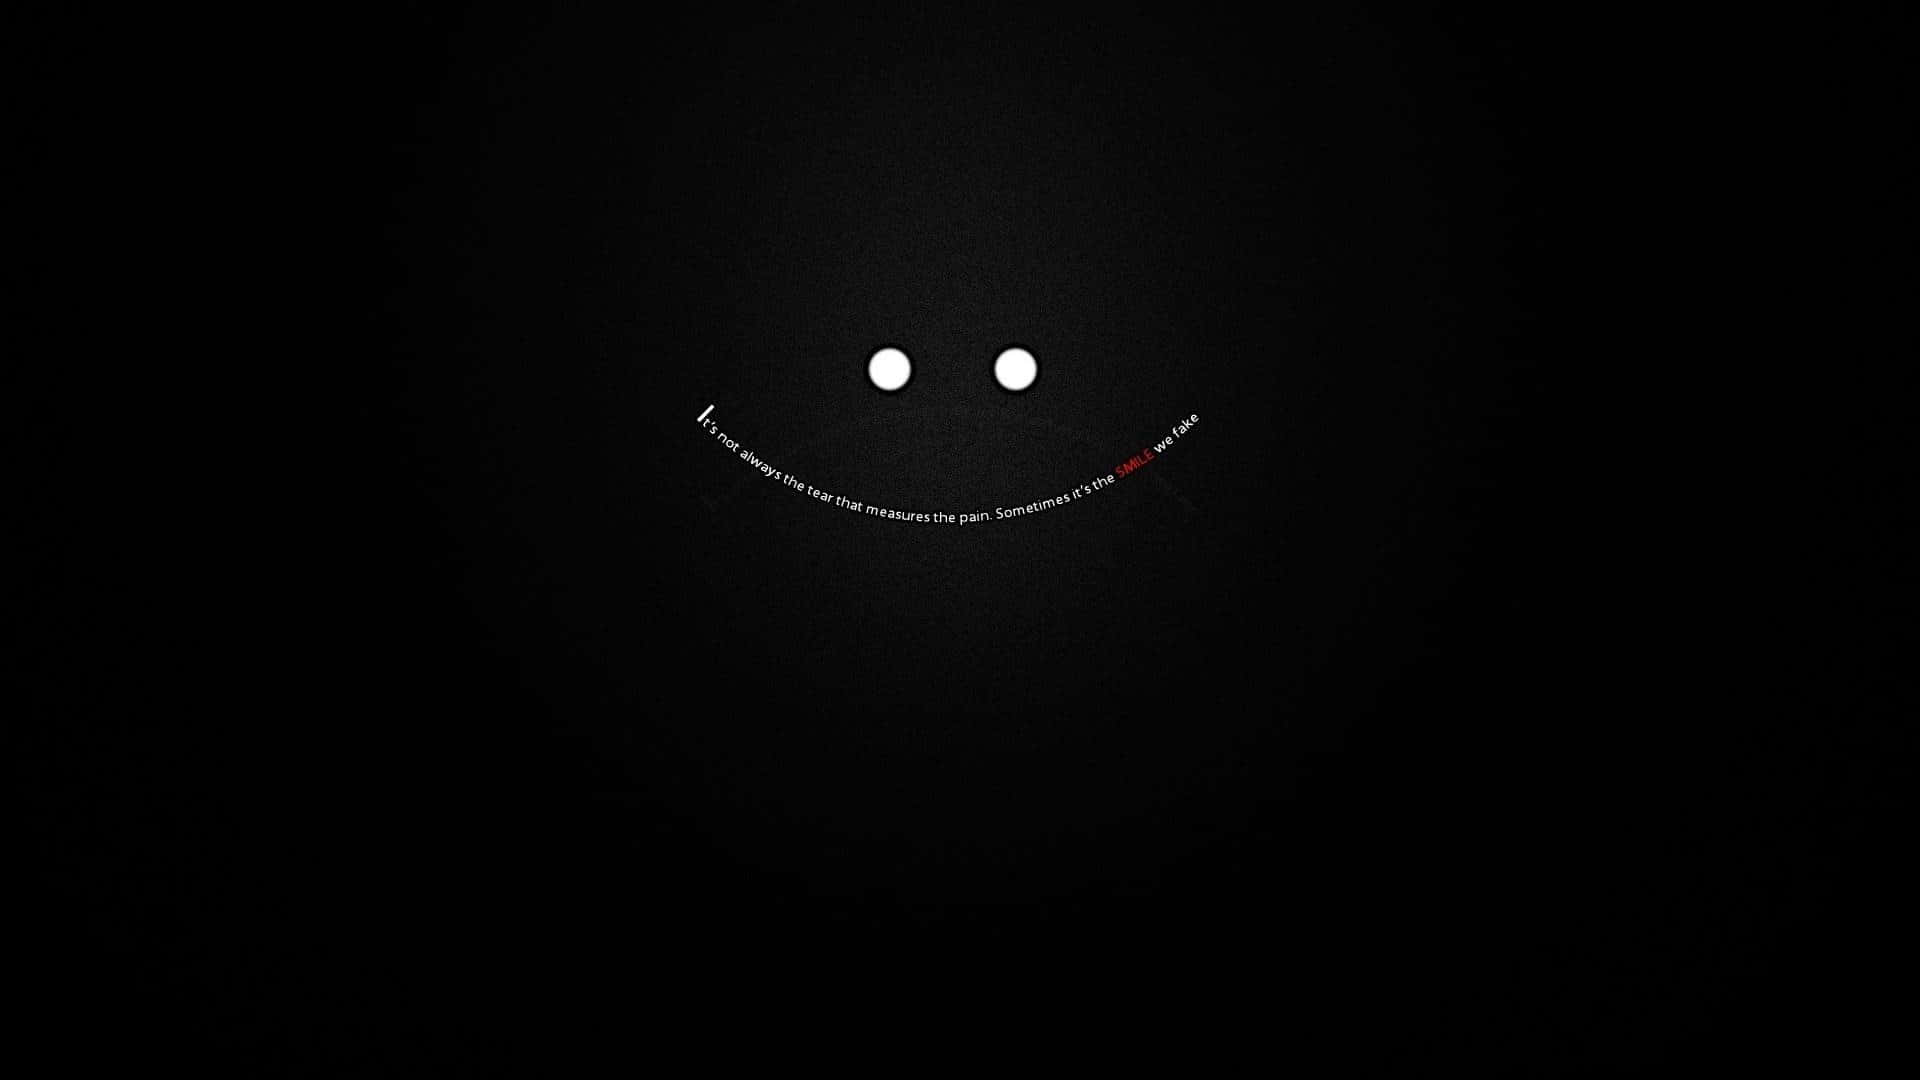 Download The Power of a Black Smile Wallpaper | Wallpapers.com